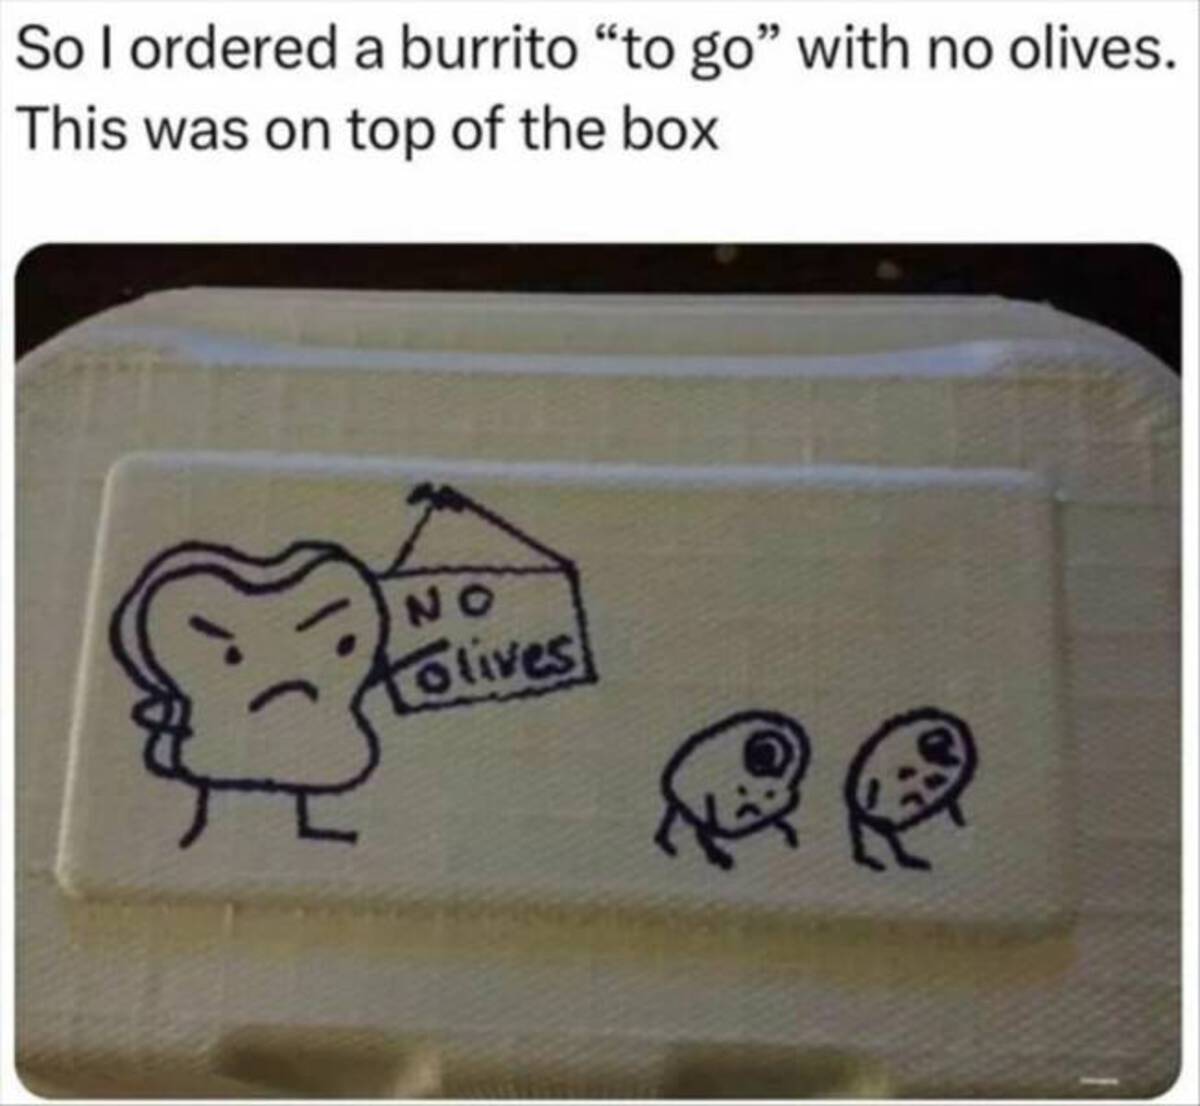 no olives - So I ordered a burrito "to go" with no olives. This was on top of the box 02 olives